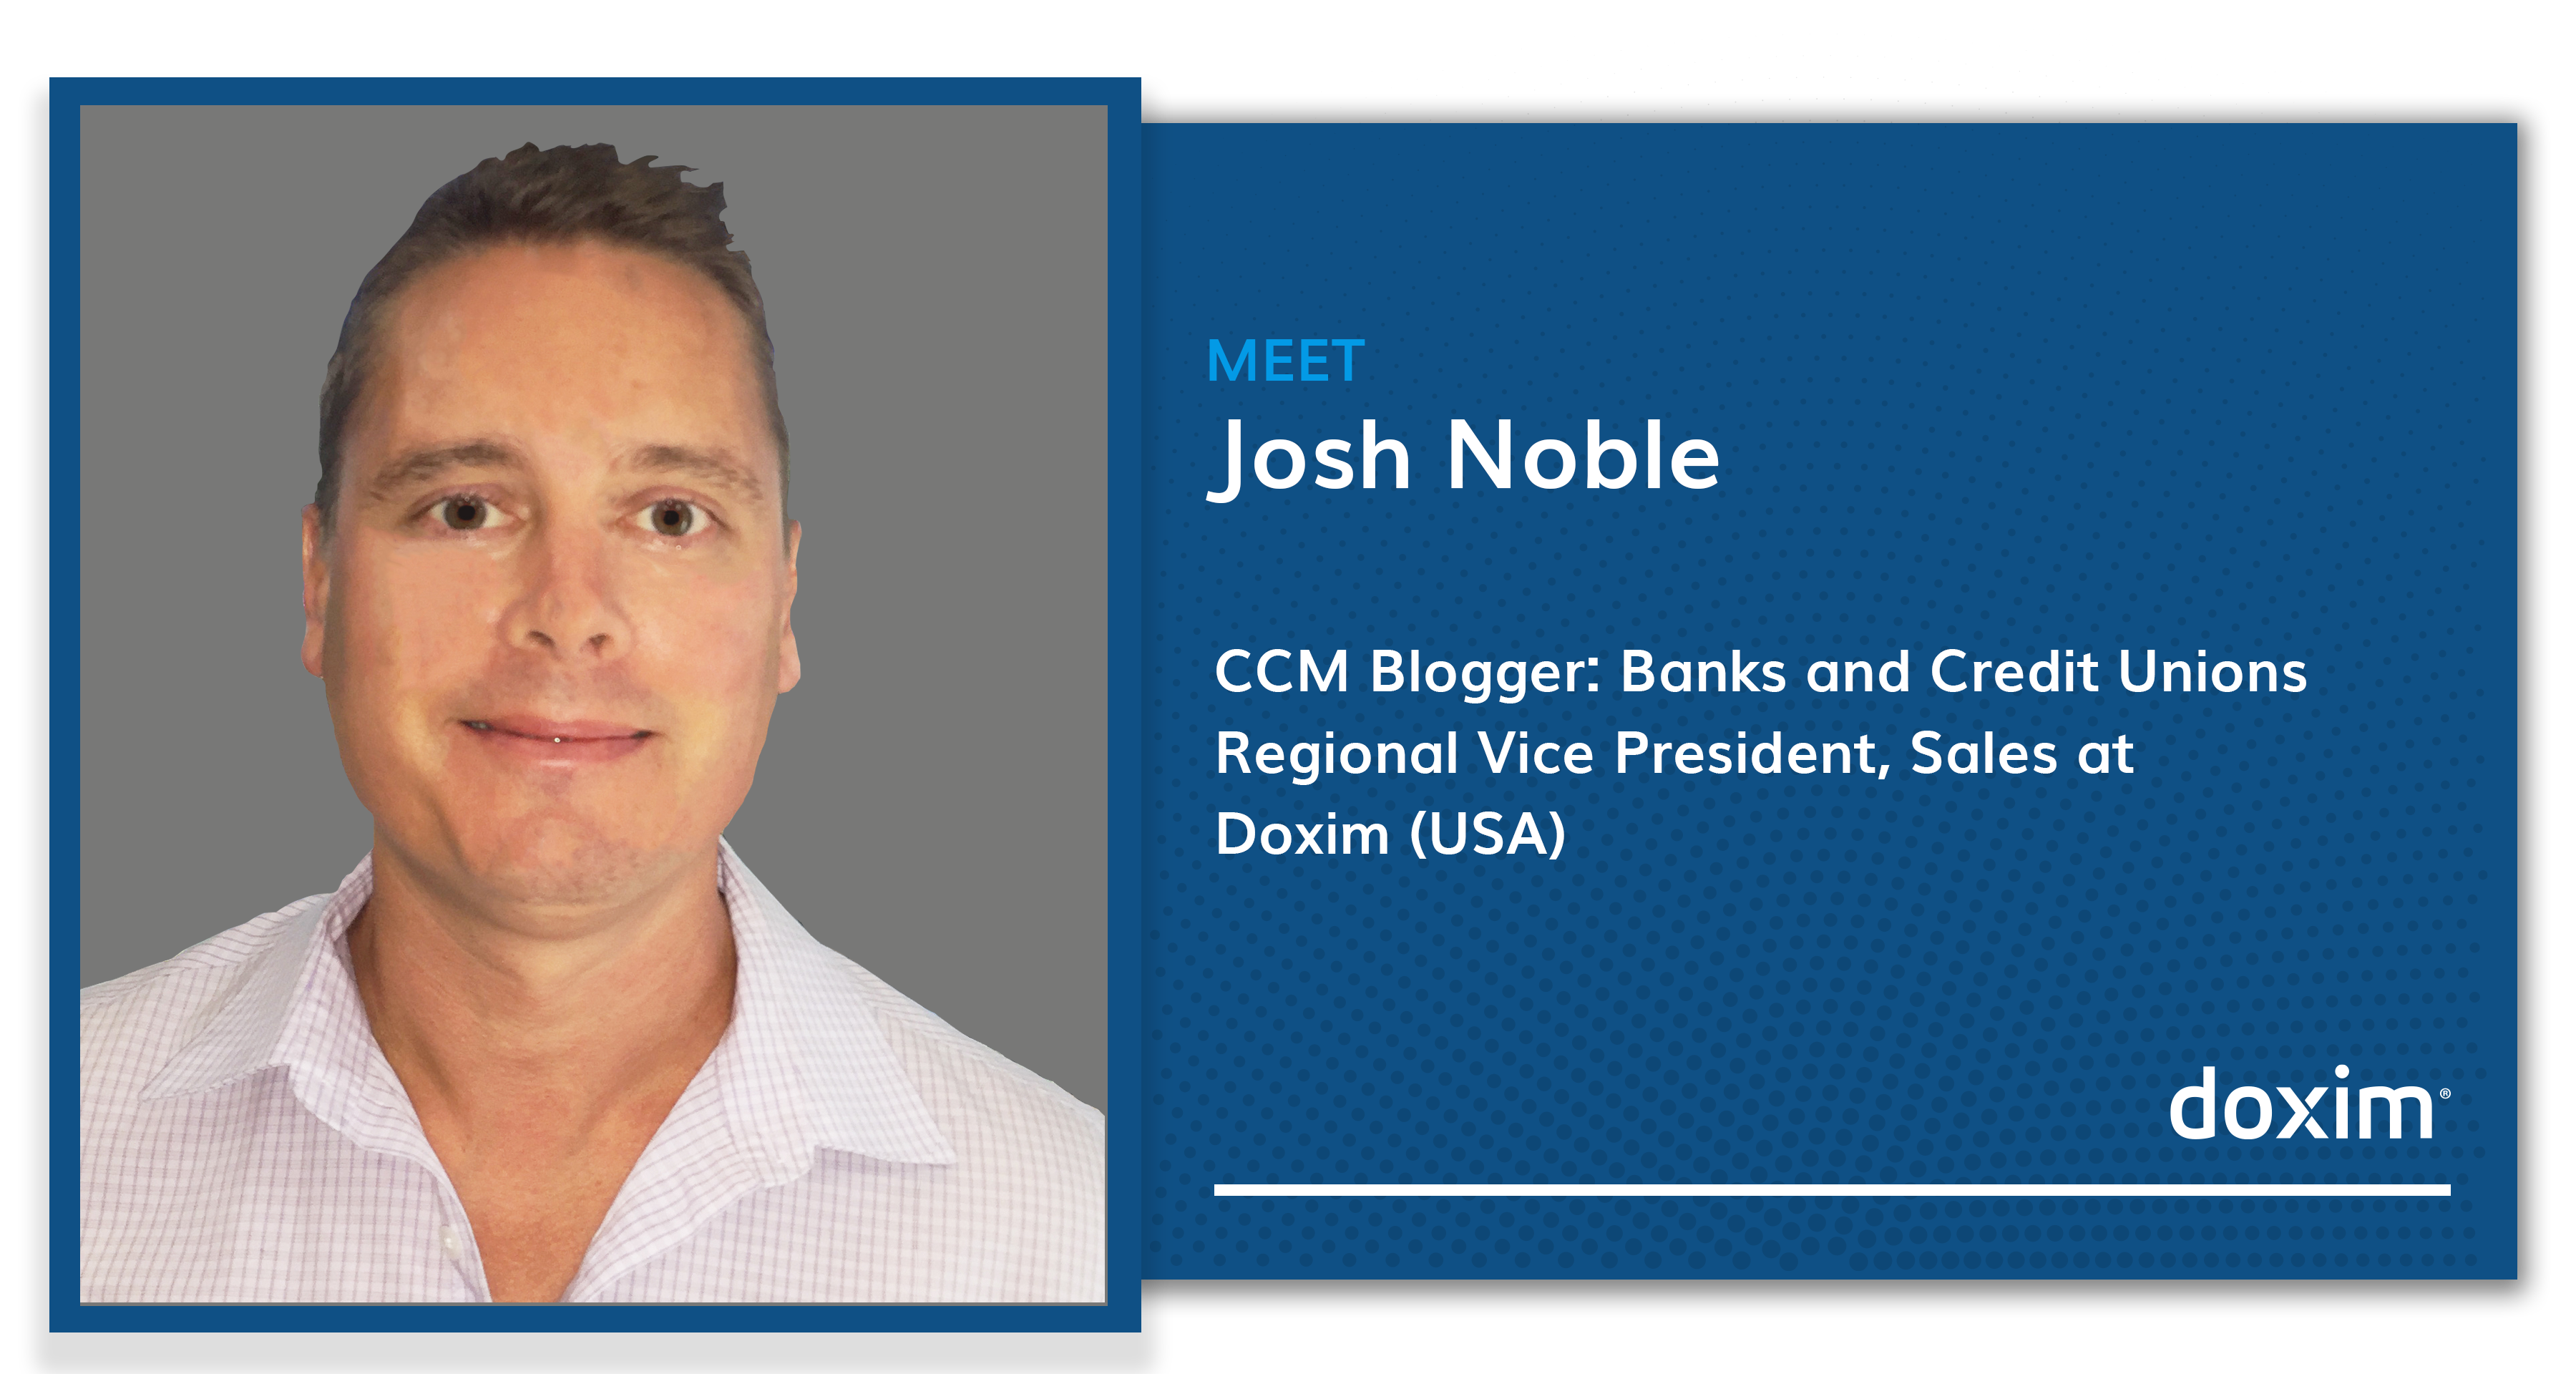 Introducing Josh Noble, Regional Vice President, Sales at Doxim (USA)